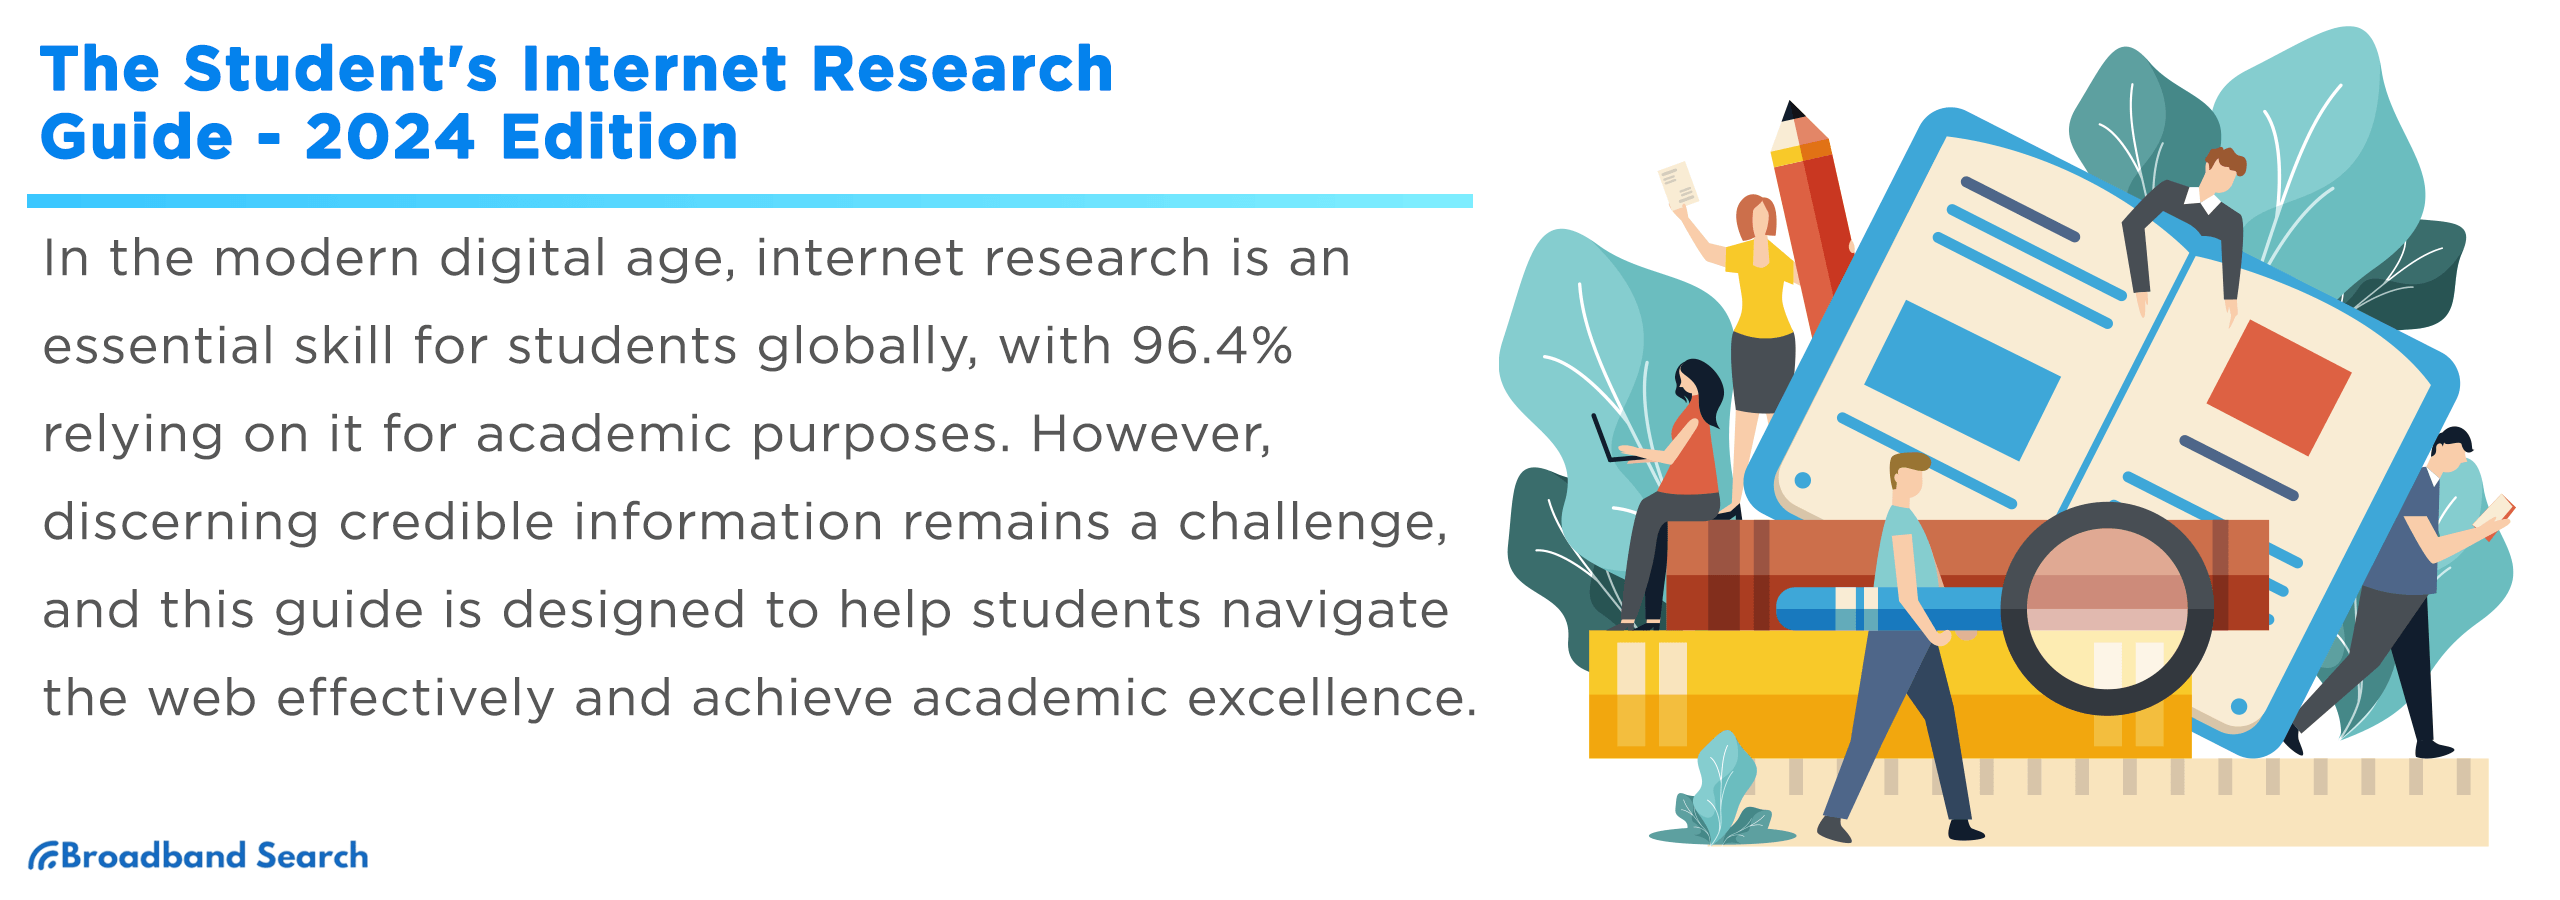 The Student's Internet Research Guide - 2024 Edition